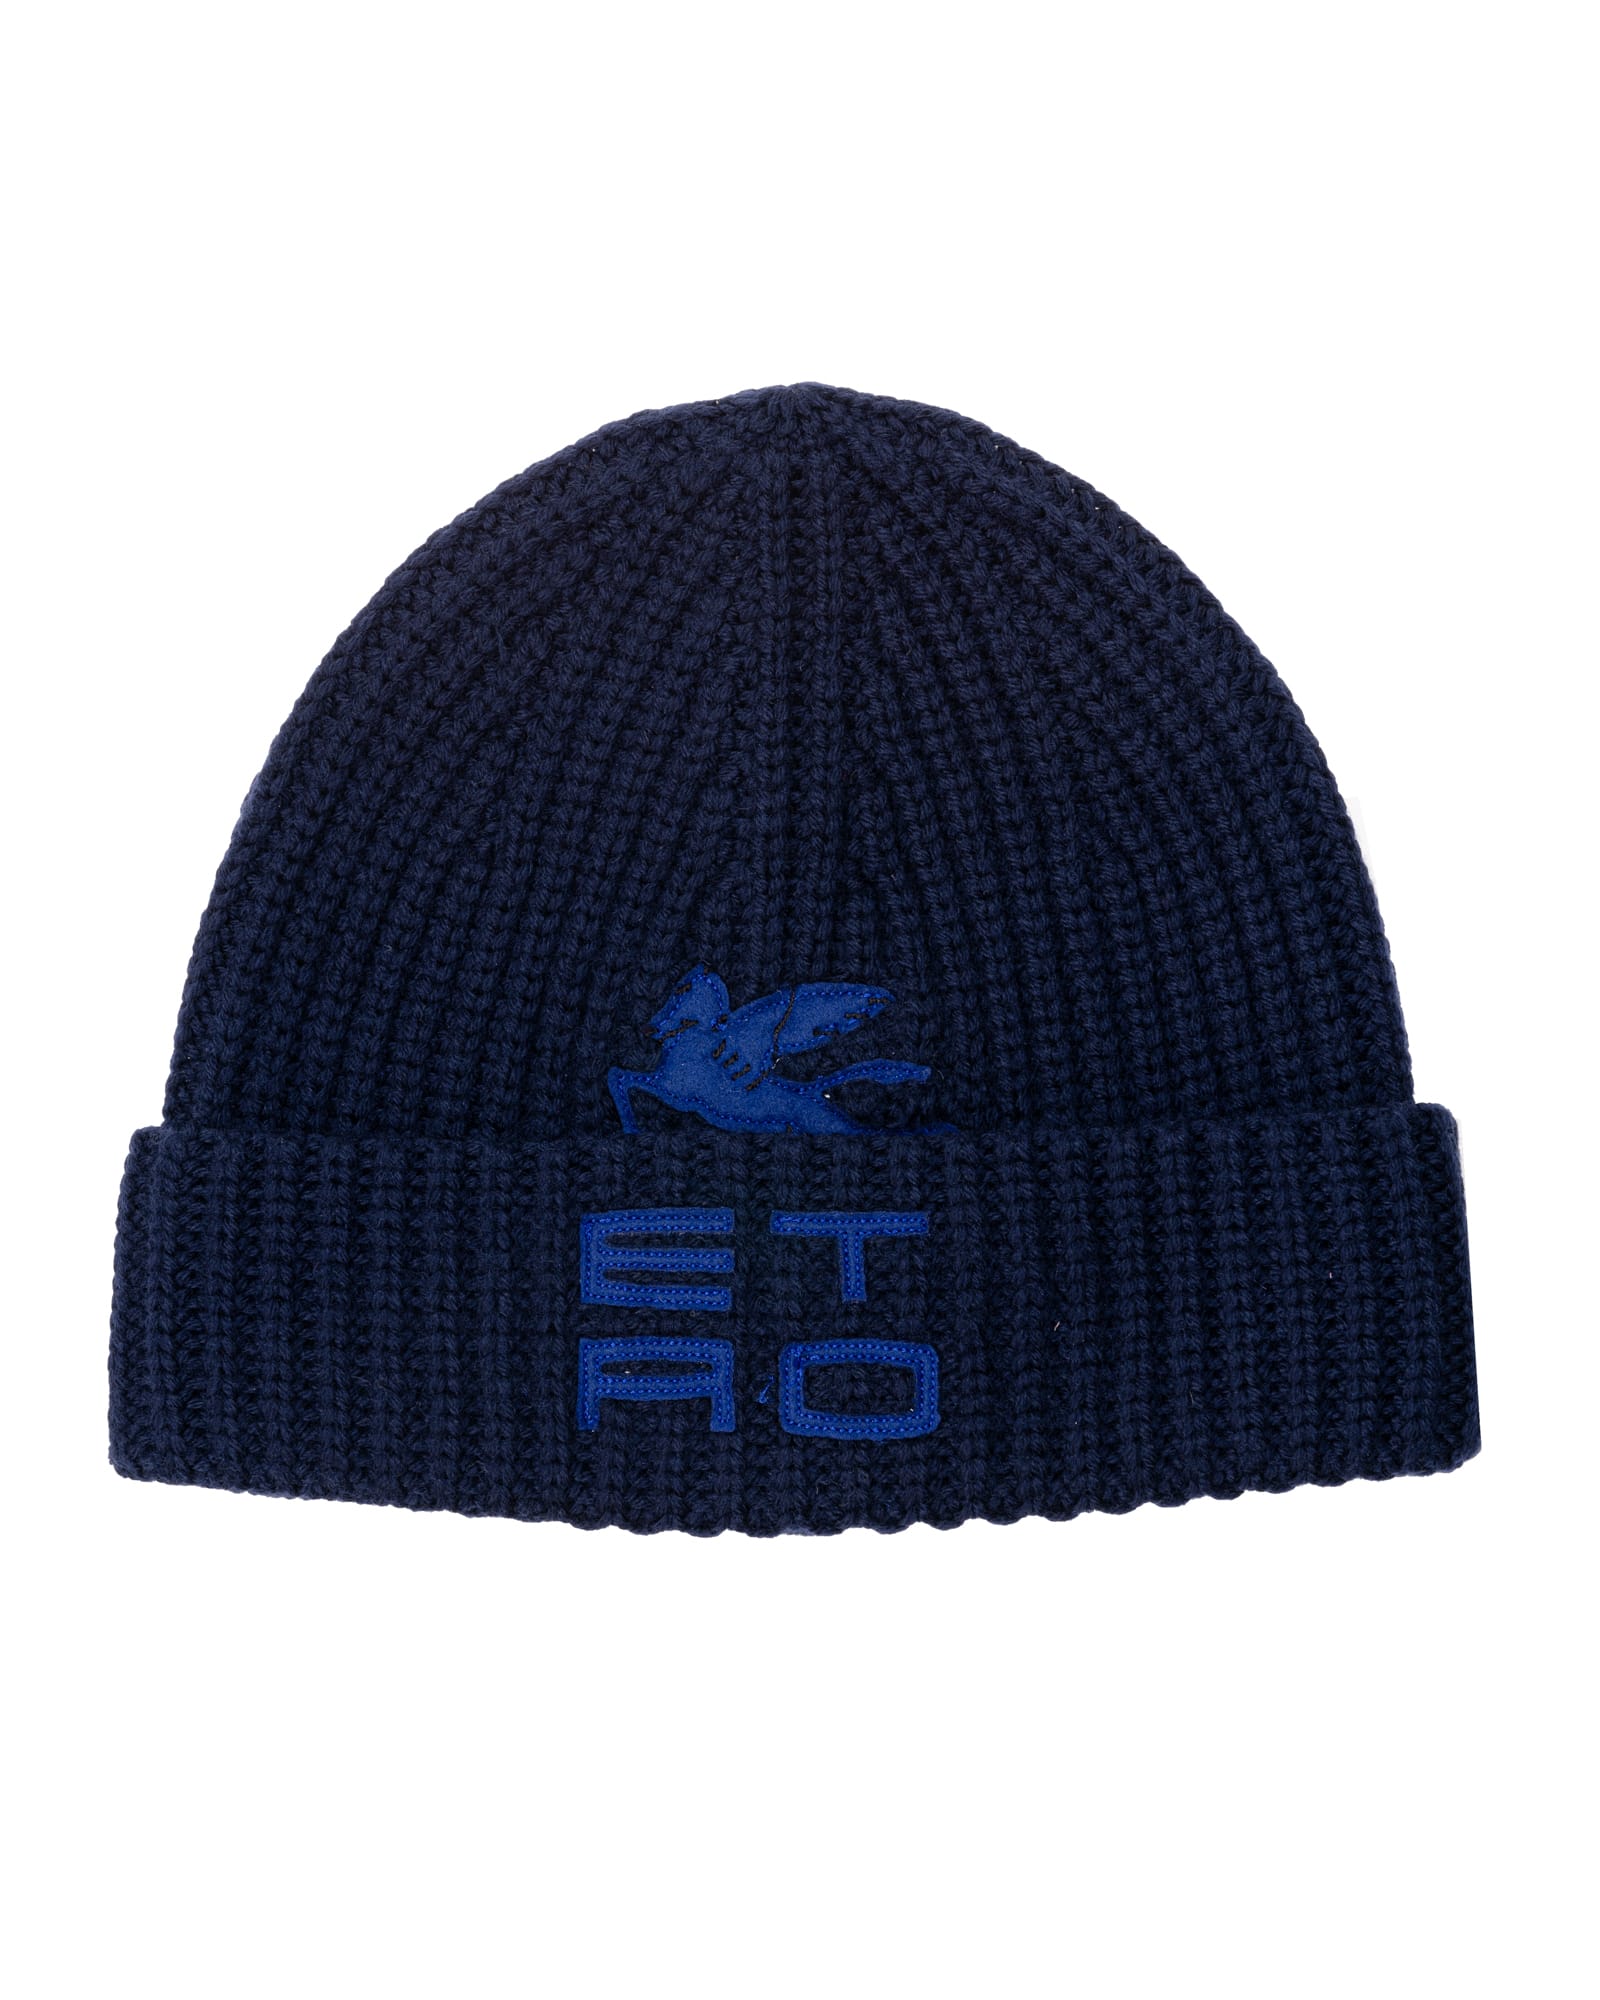 Etro Wool knit hat featuring the CUBE logo